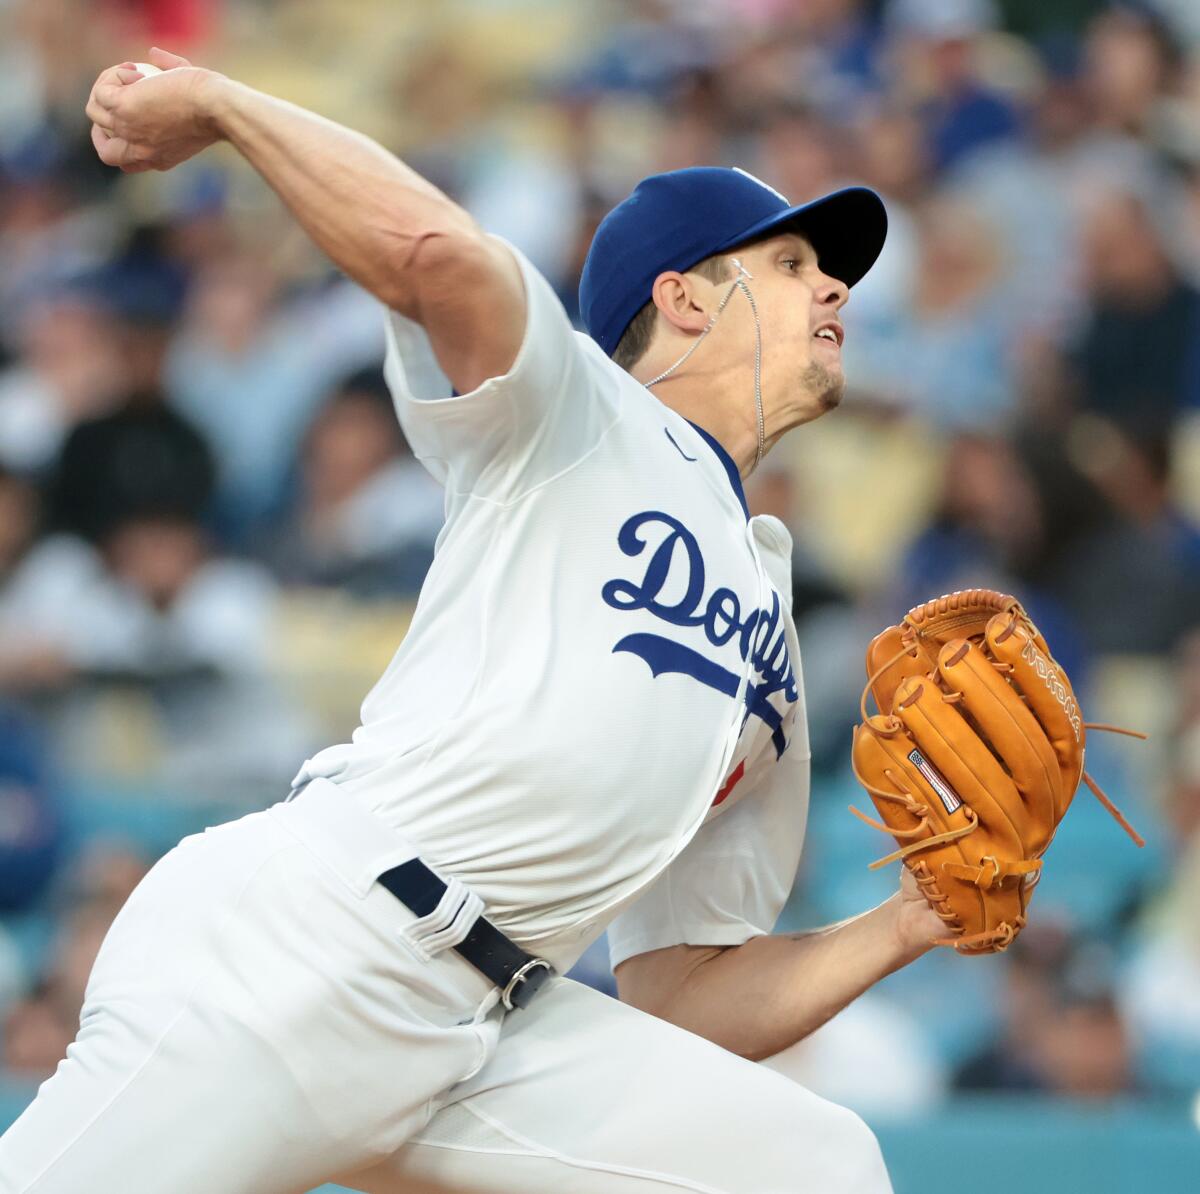 Dodgers pitcher Gavin Stone delivers against the Braves in the first inning Friday.